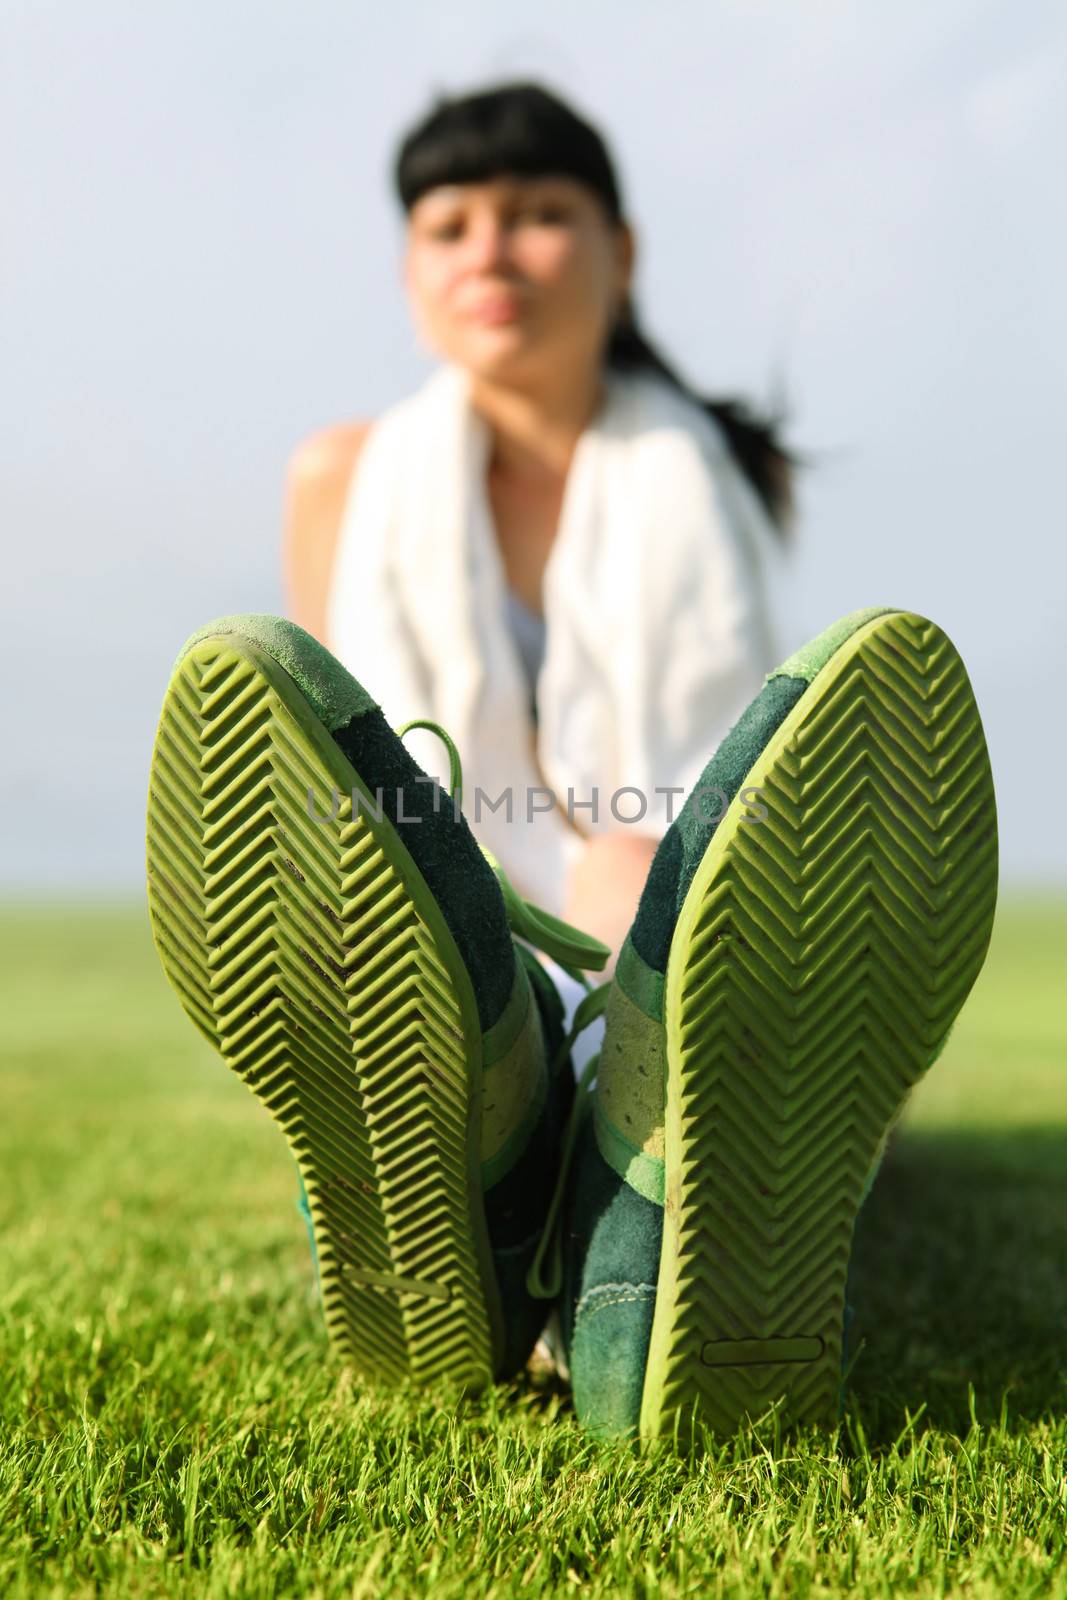 green sole of shoes on grass, tired sportswoman